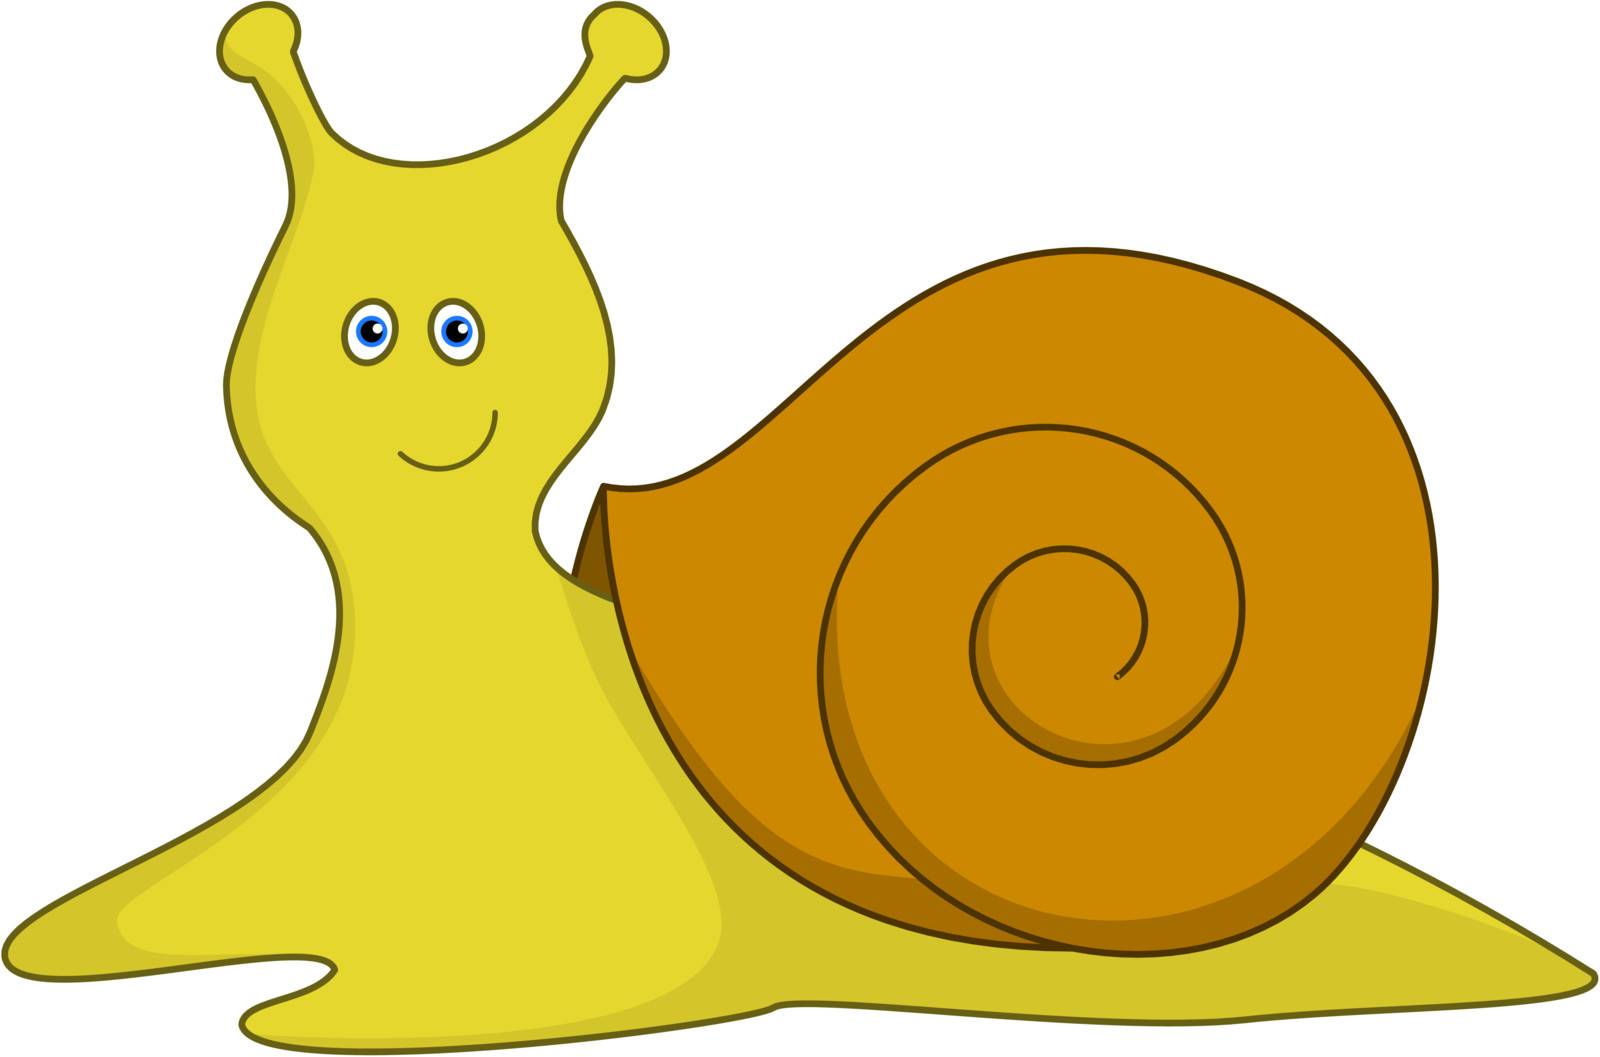 Cheerful smiling yellow blue-eyed snail with a brown bowl